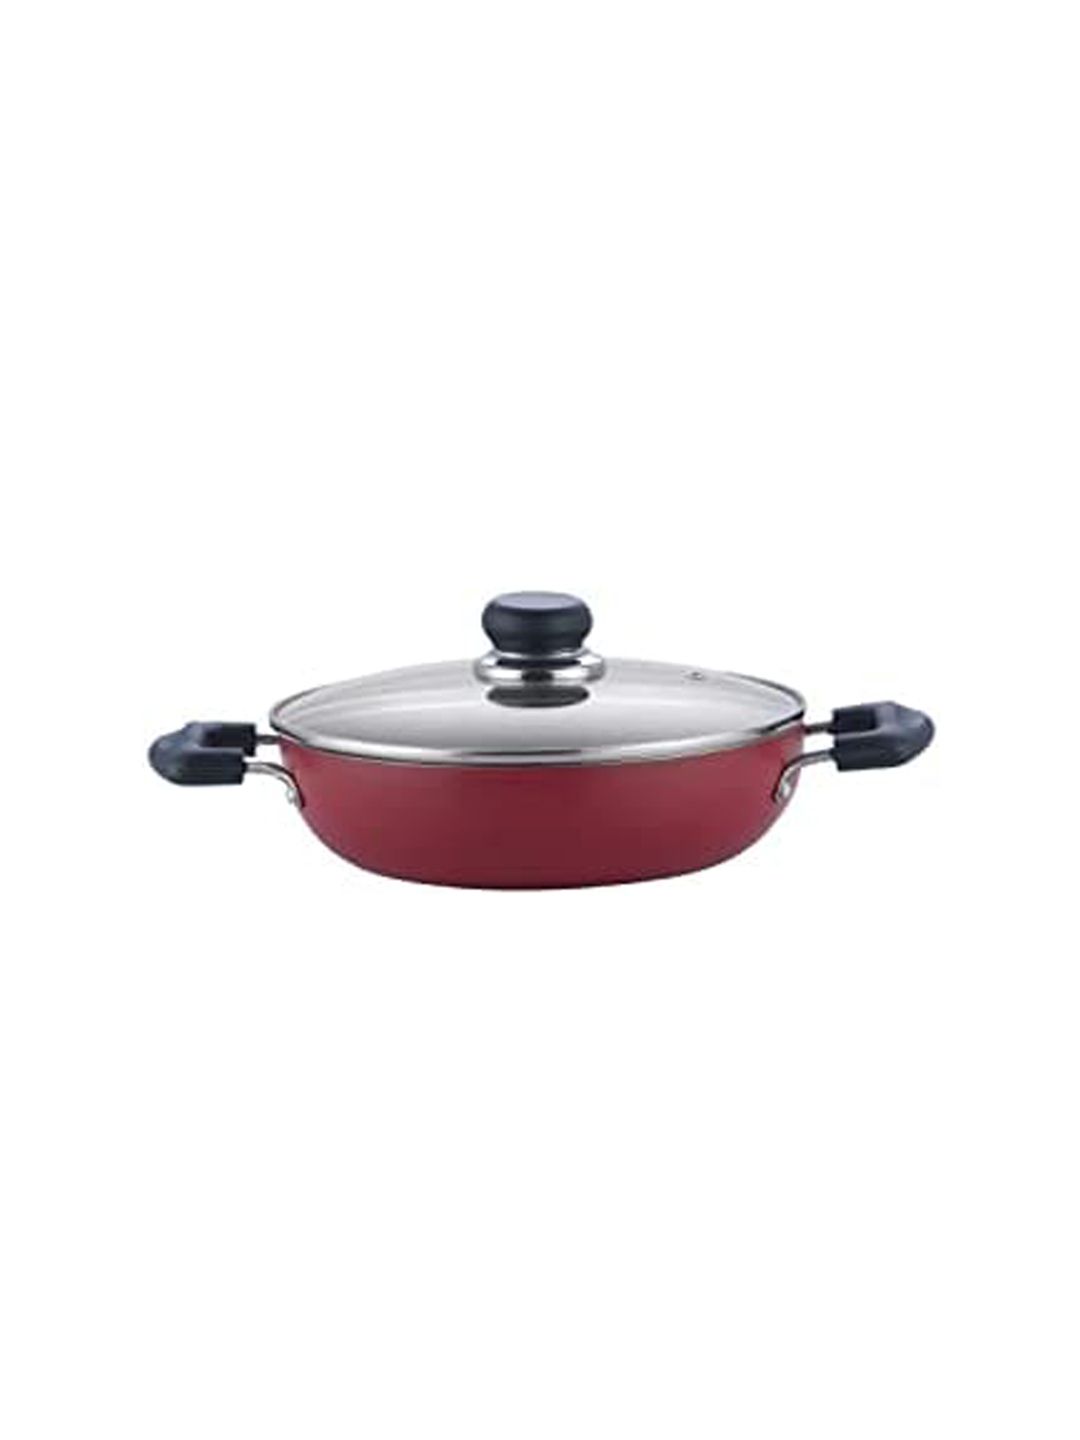 Vinod Red & Black Solid Aluminum Cookware 2.8 Ltr Price in India